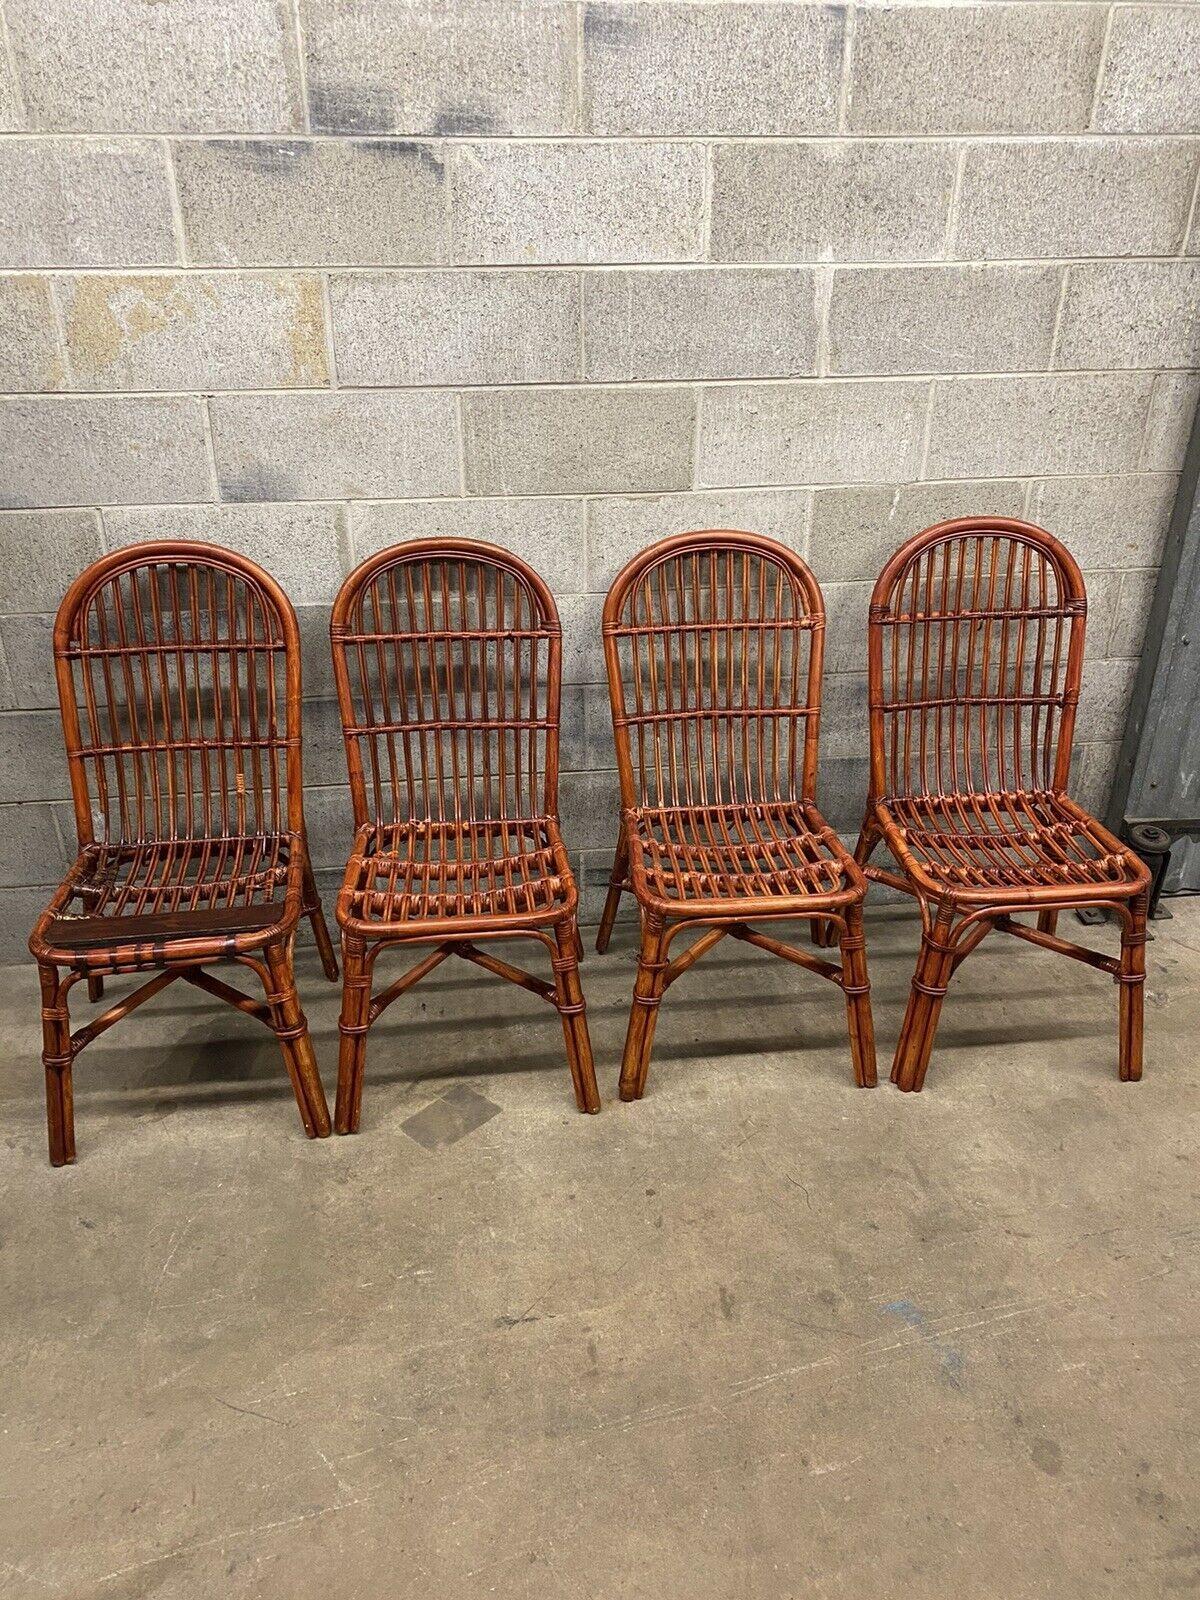 Vintage Hollywood Regency Palm Beach Bamboo Dining Side Chairs - Set of 4 For Sale 3